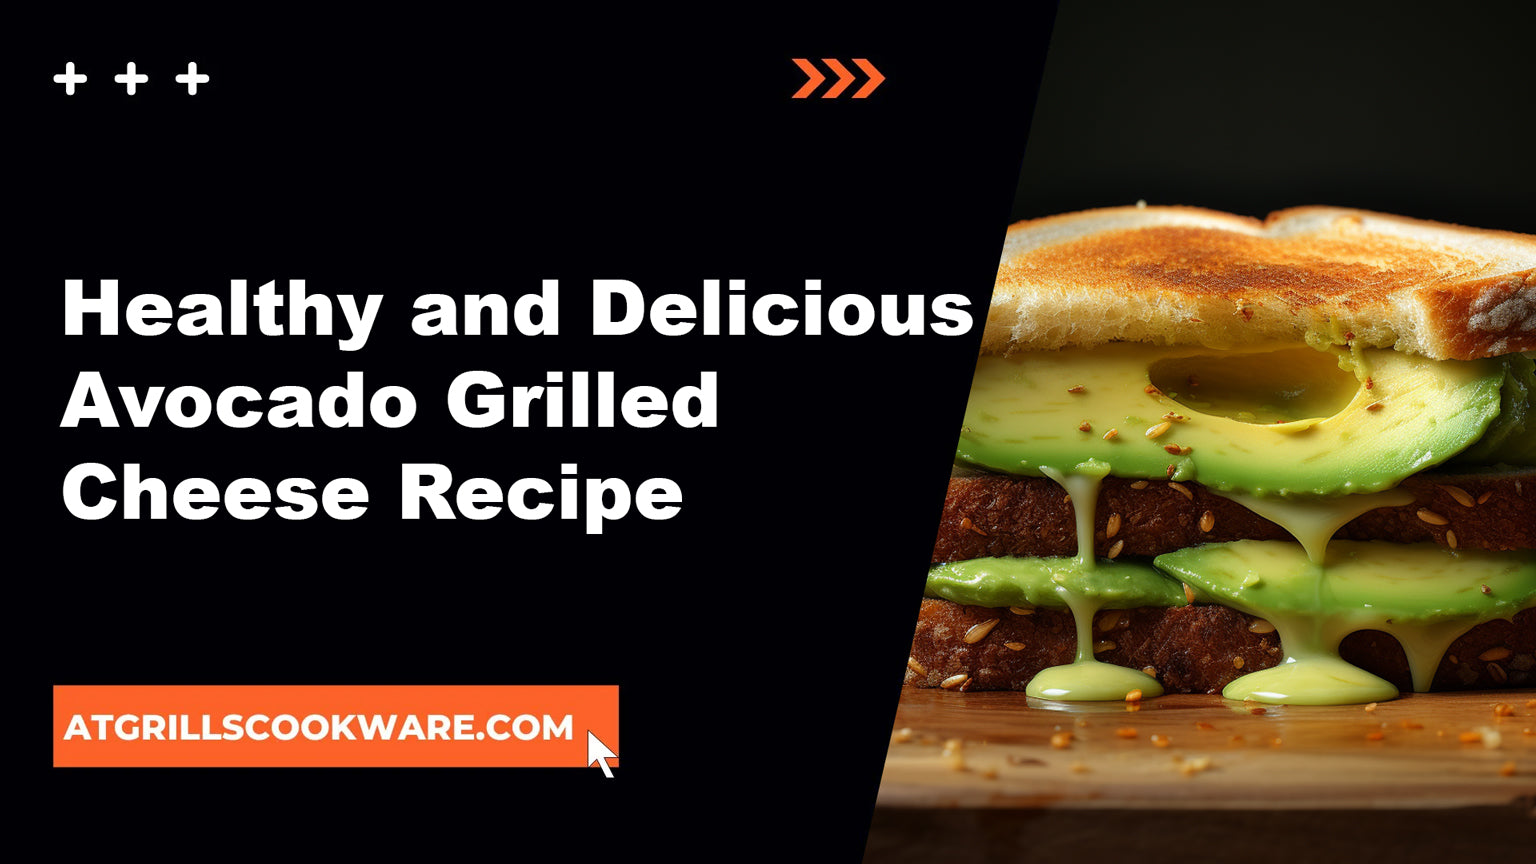 7 Creative and Healthy Avocado Grilled Cheese Recipes to Satisfy Your Cravings